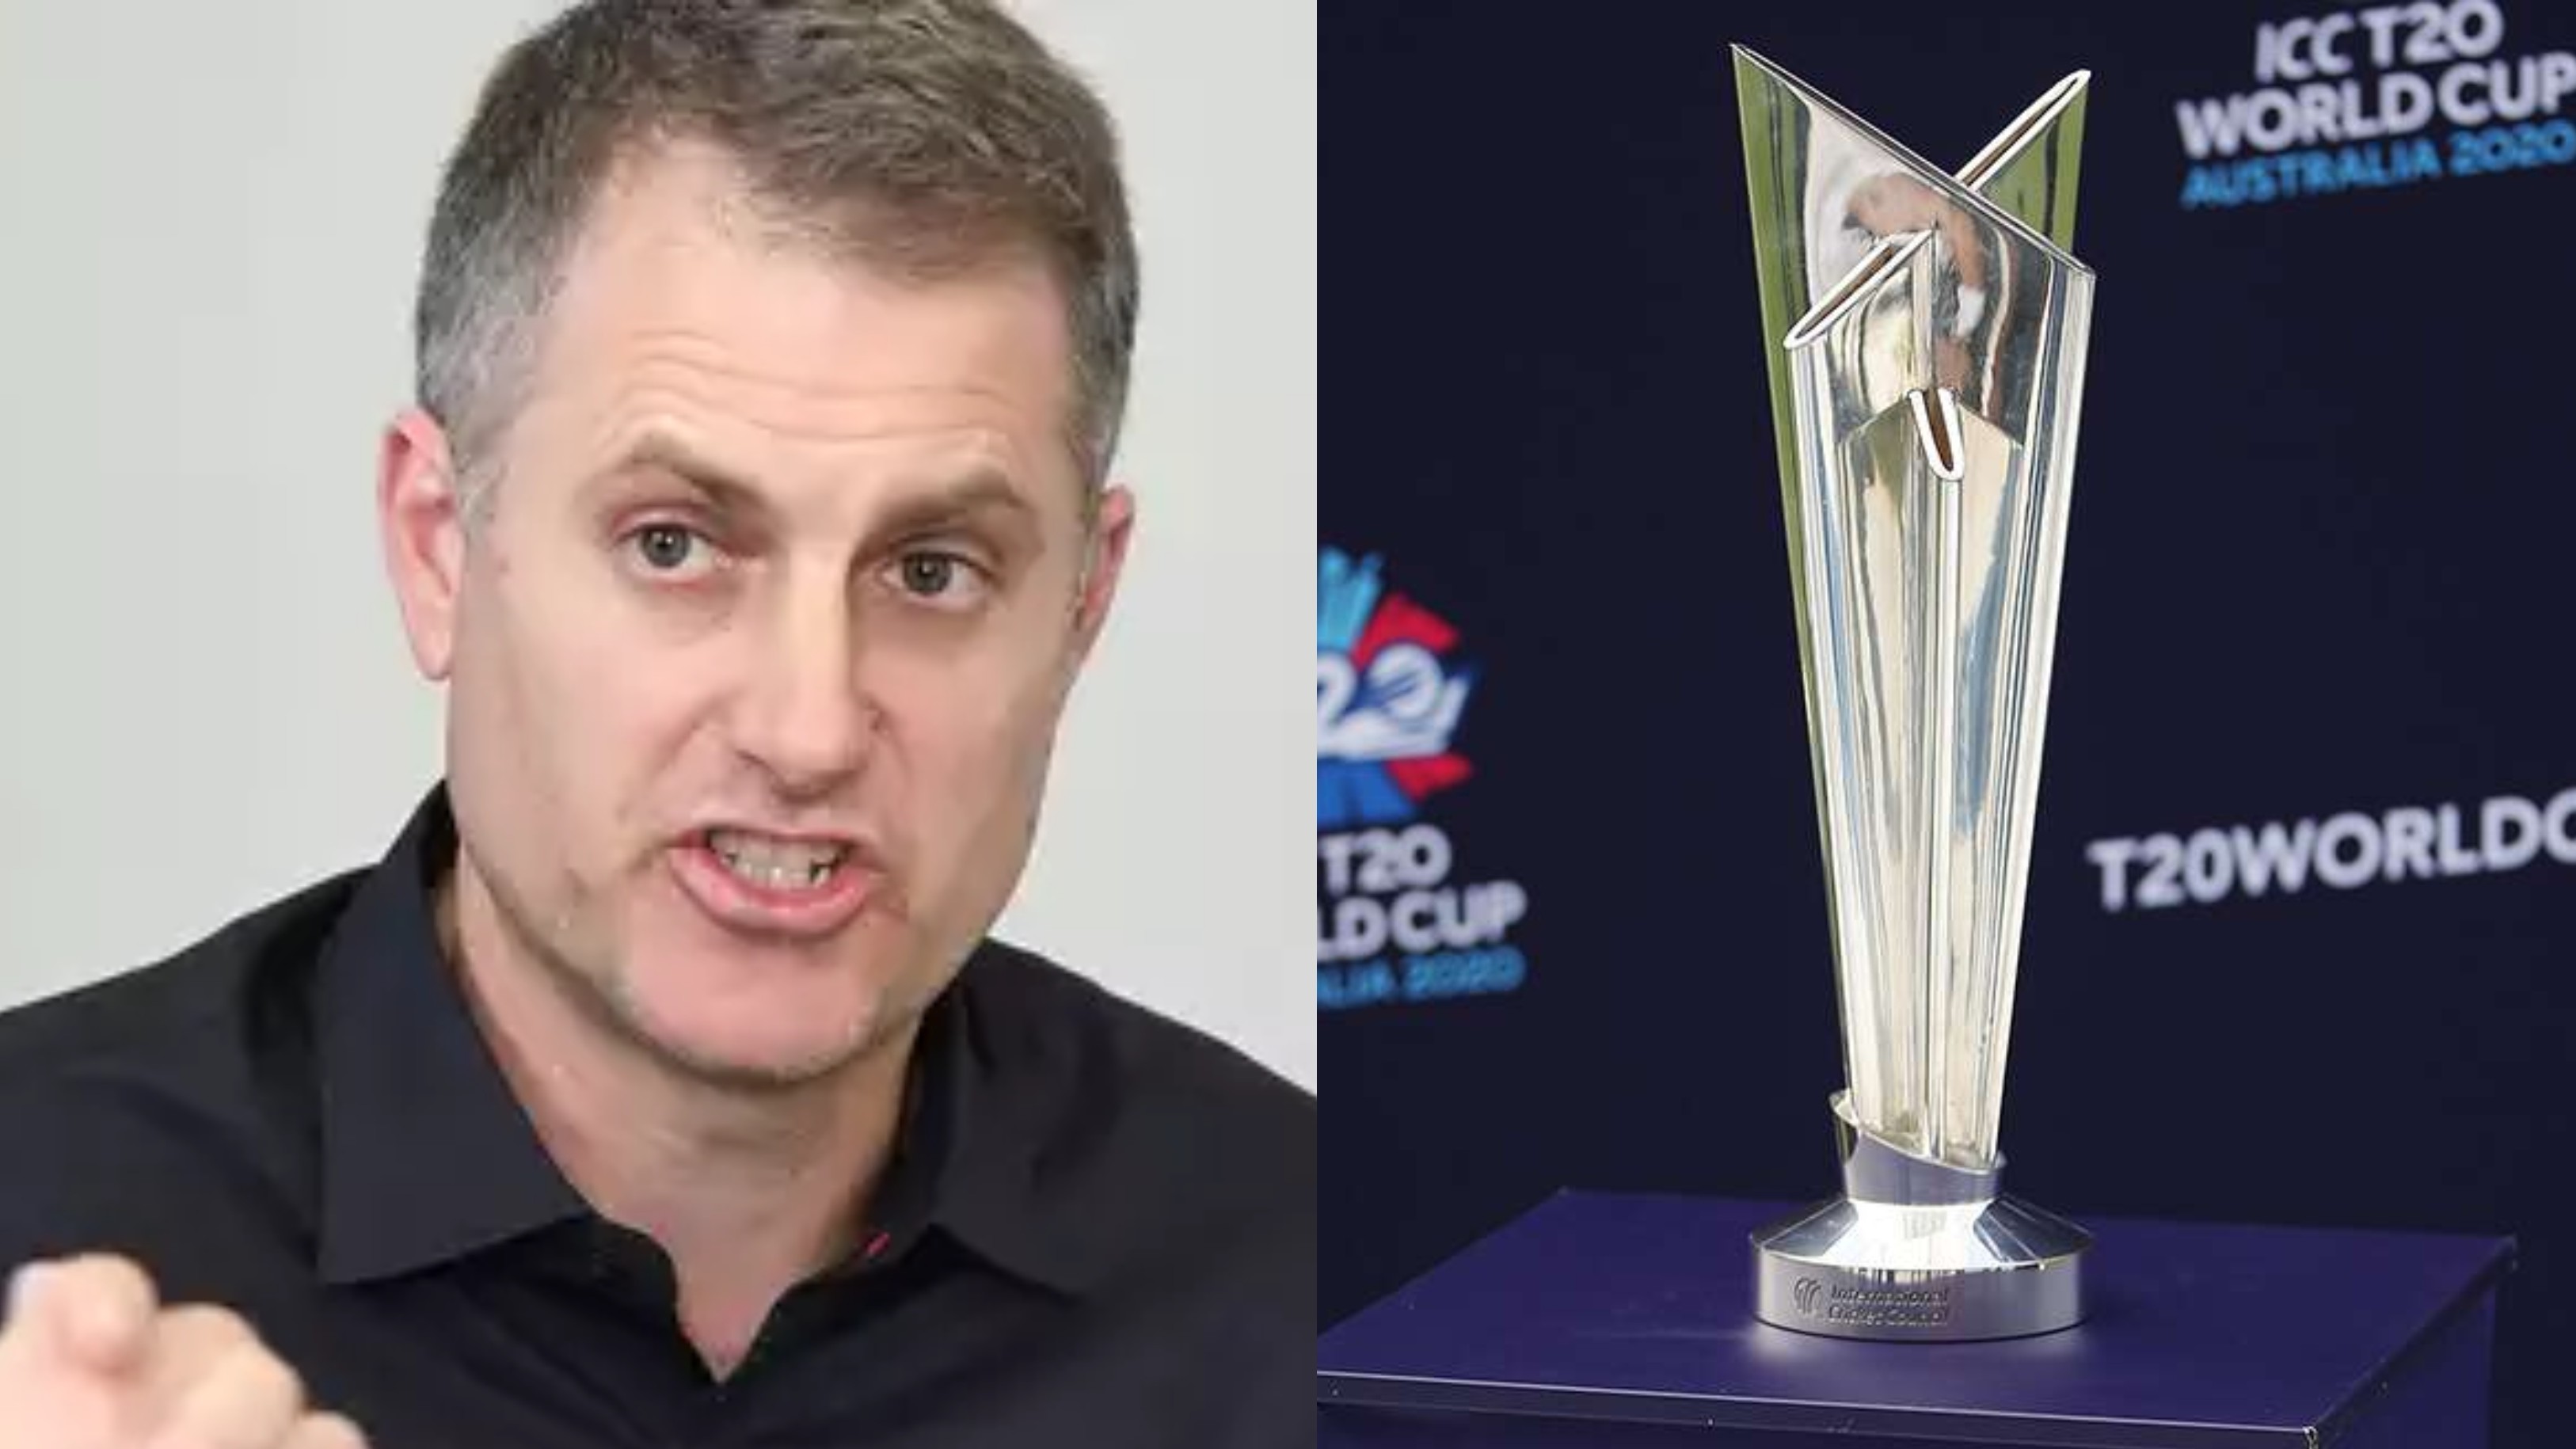 Simon Katich suggests pushing T20 World Cup to next year due to COVID-19 crisis